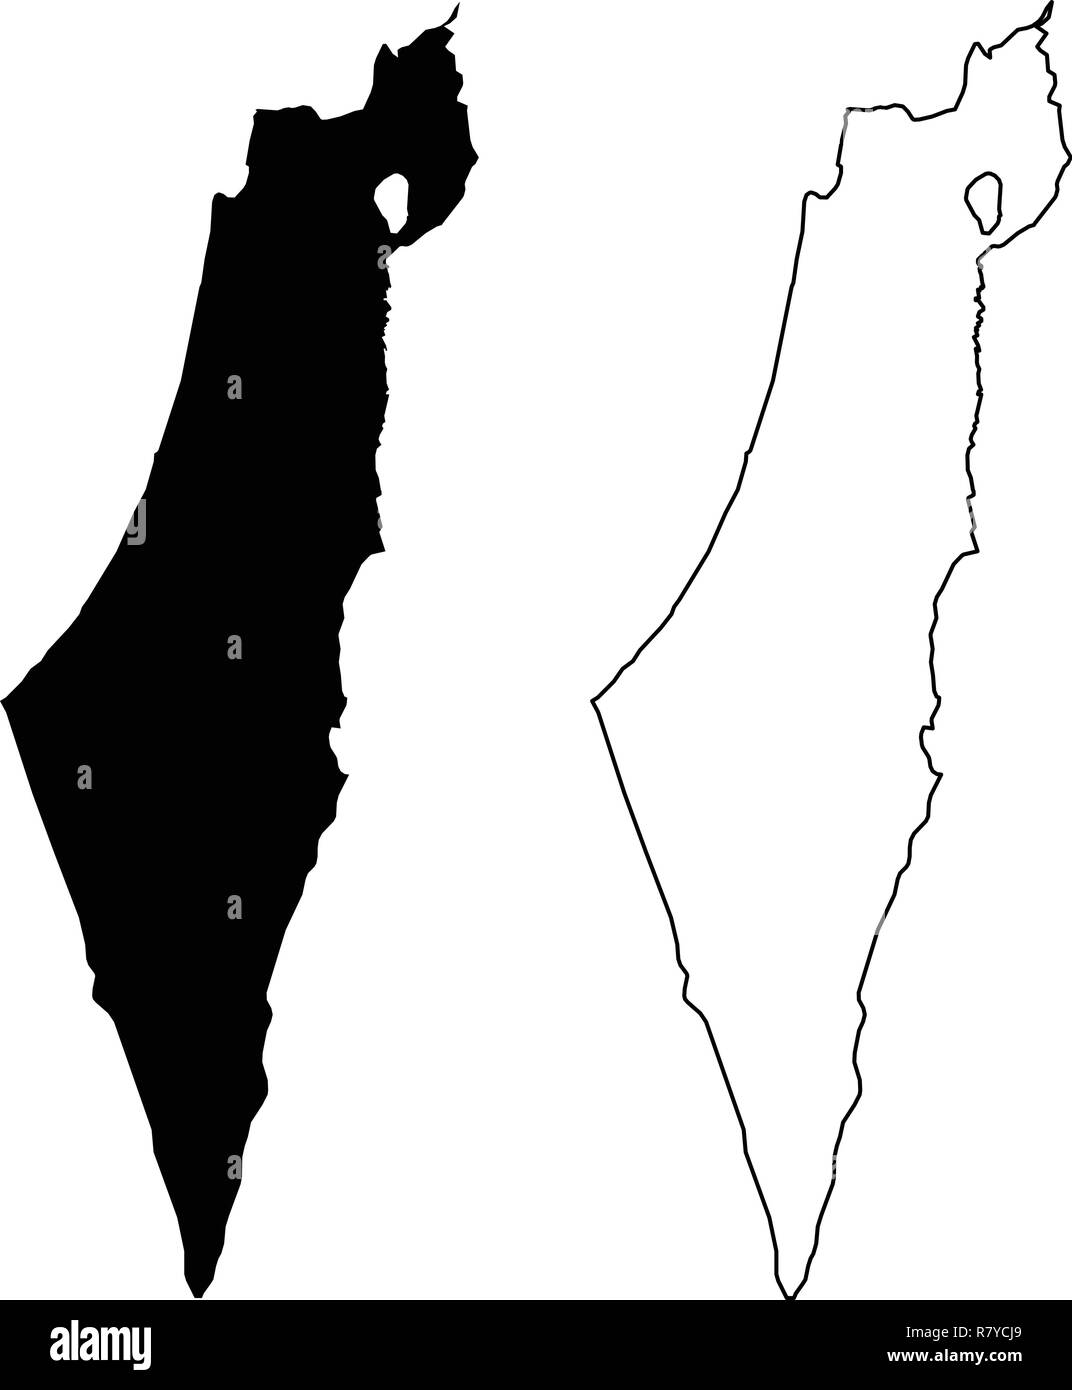 Simple (only sharp corners) map of Israel (including Palestine - Gaza strip and West bank) vector drawing. Mercator projection. Filled and outline ver Stock Vector